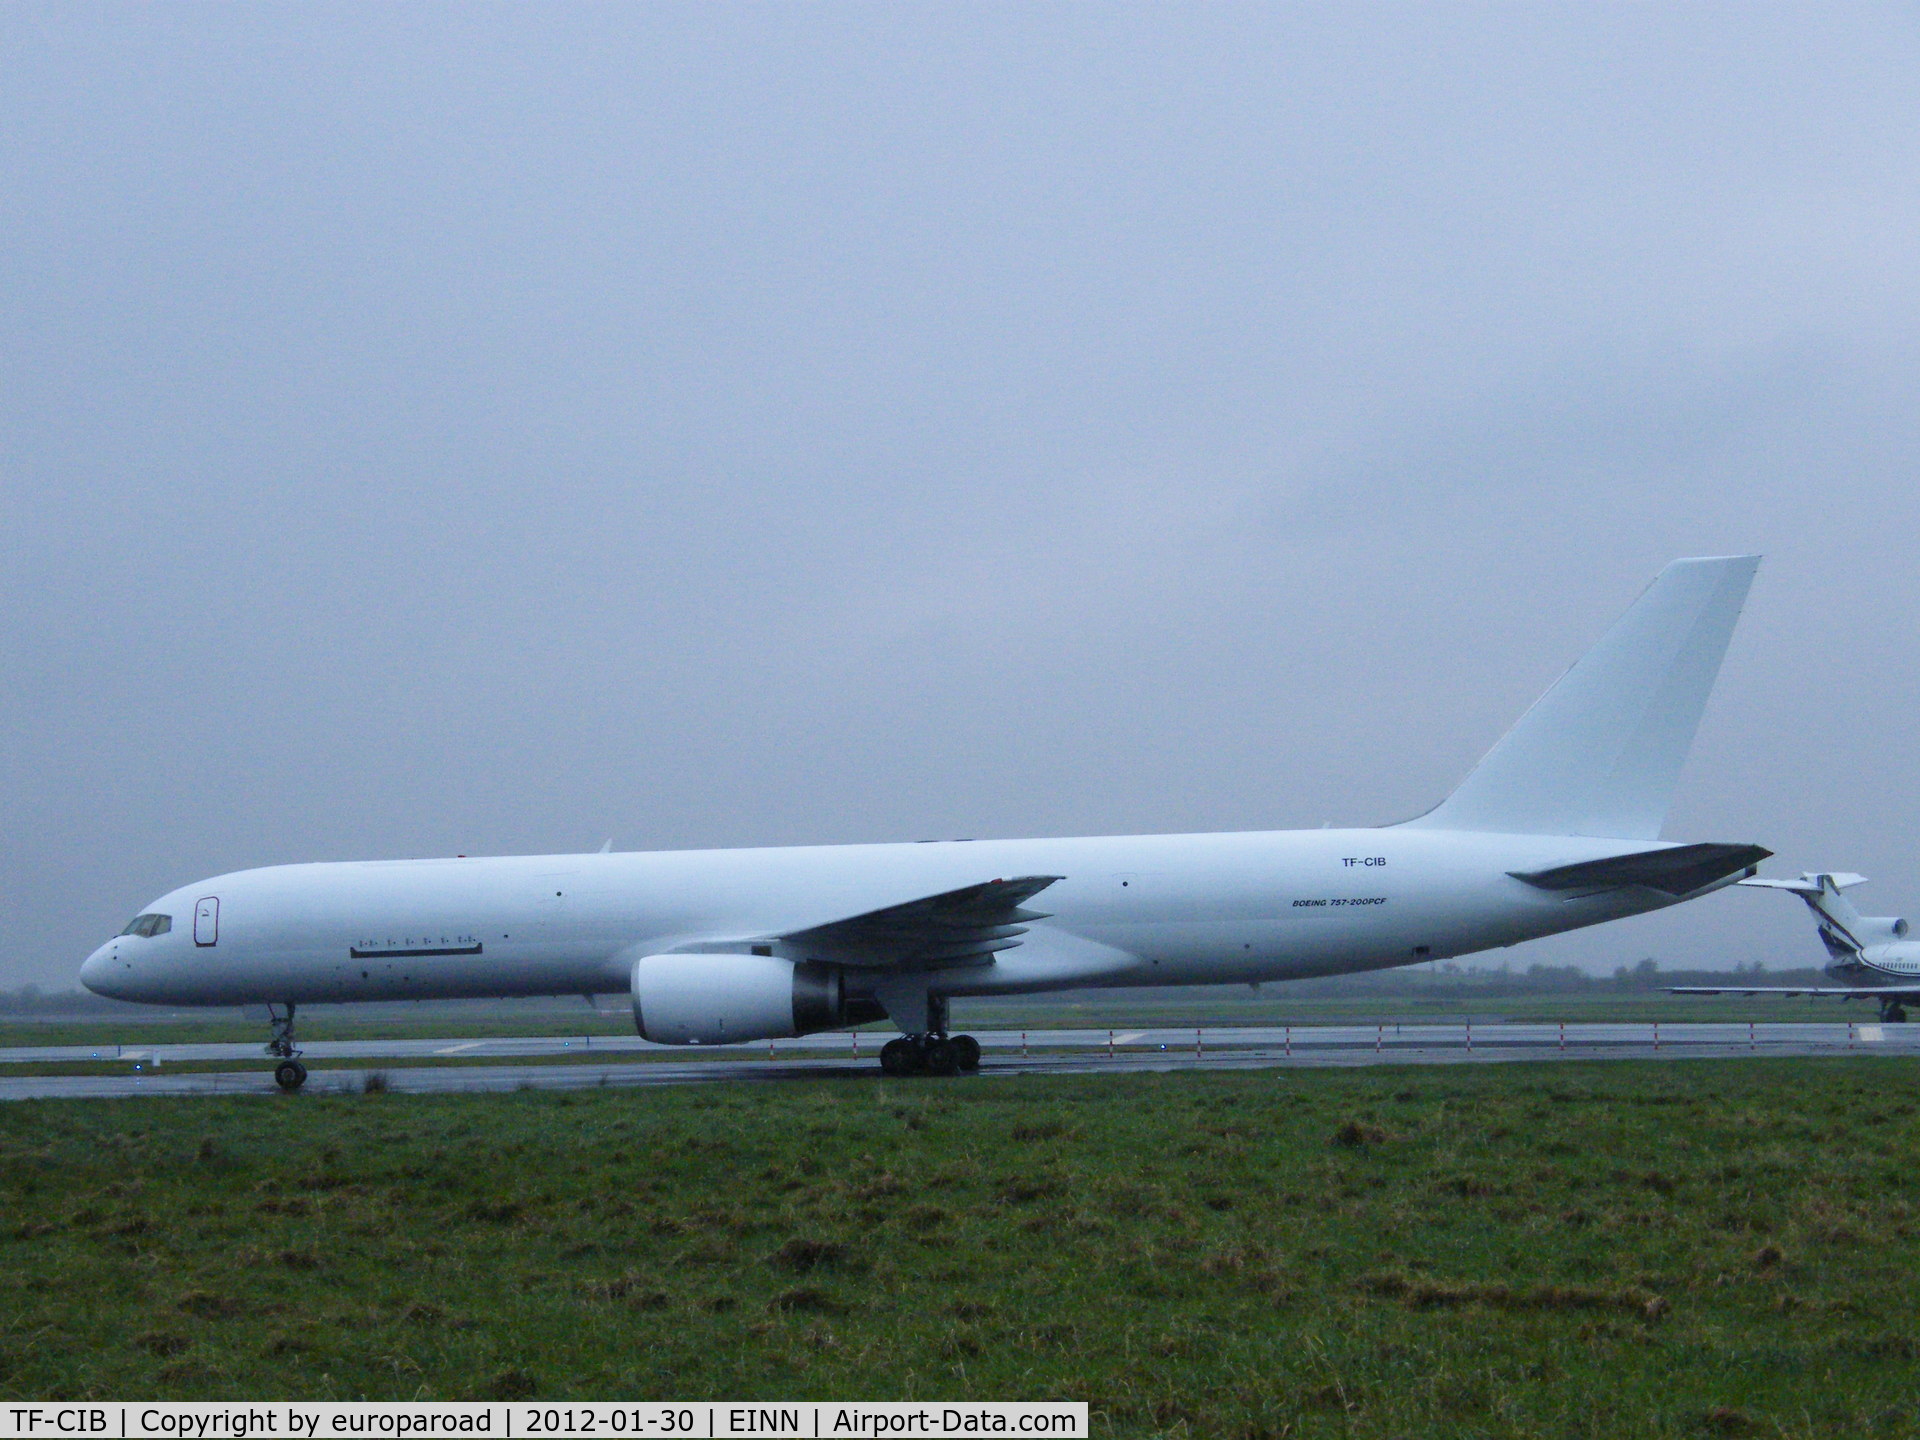 TF-CIB, 1992 Boeing 757-204 C/N 26962, after painting at shannon in january 2012